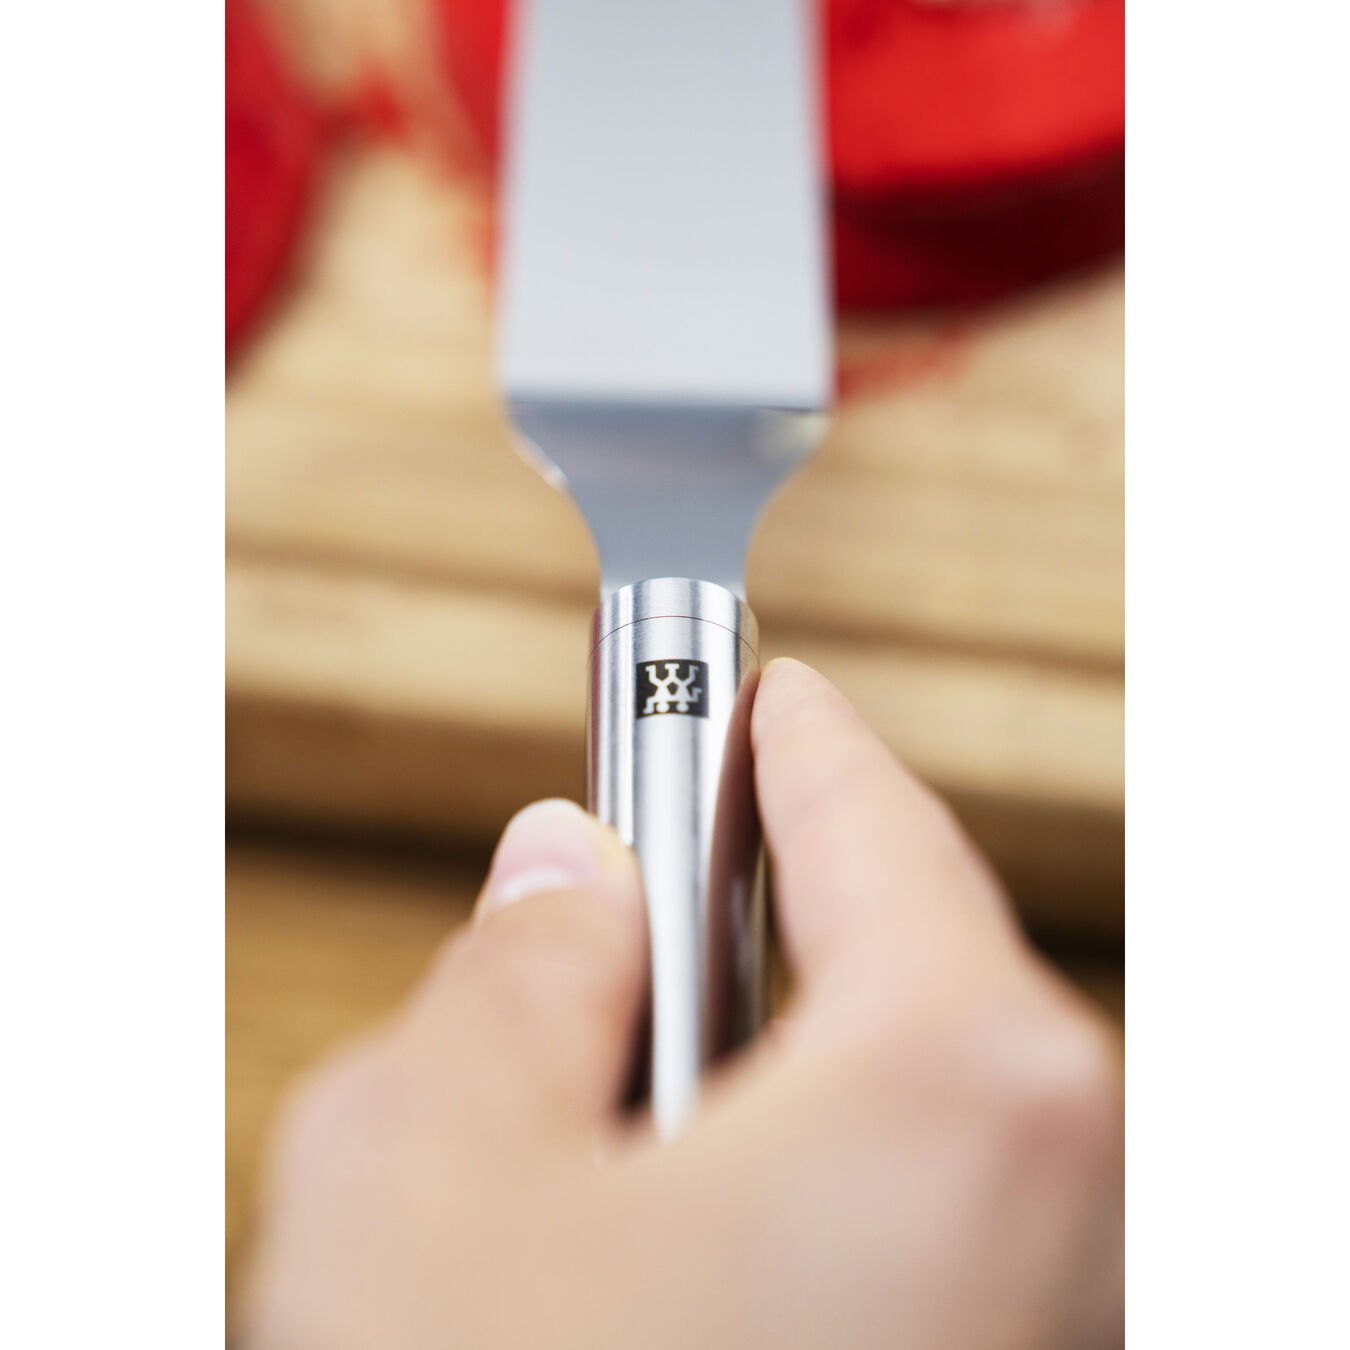 16-inch Long Spatula - Angled, 18/10 Stainless Steel ,,large 4